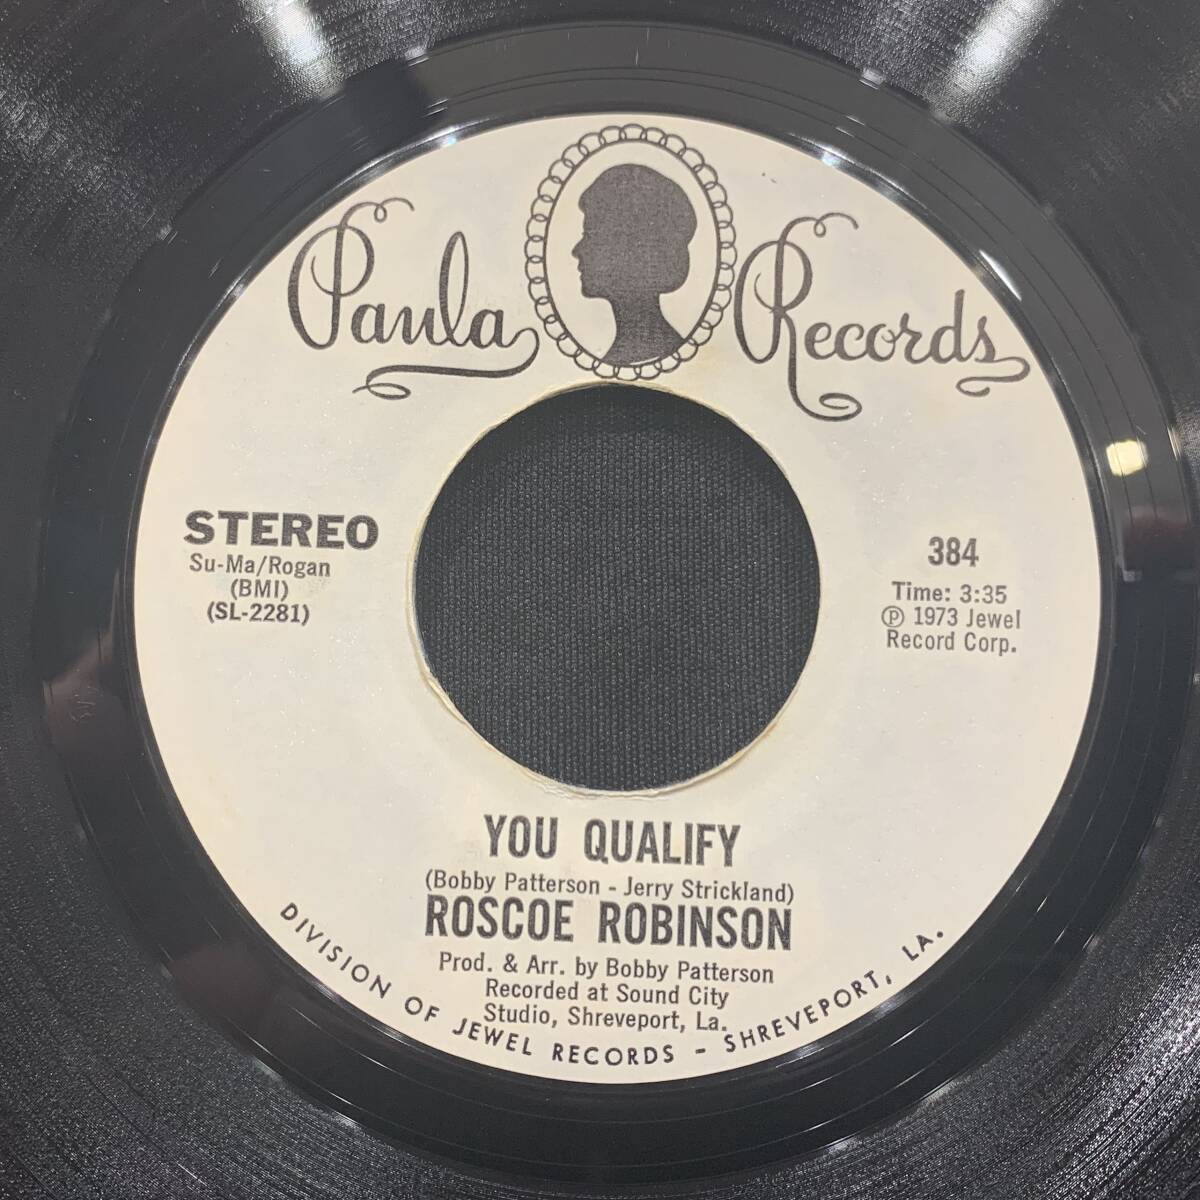 [EP]Roscoe Robinson - You Qualify / (Standing In The ) Safety Zone 1973 year US original Promo Paula Records 384